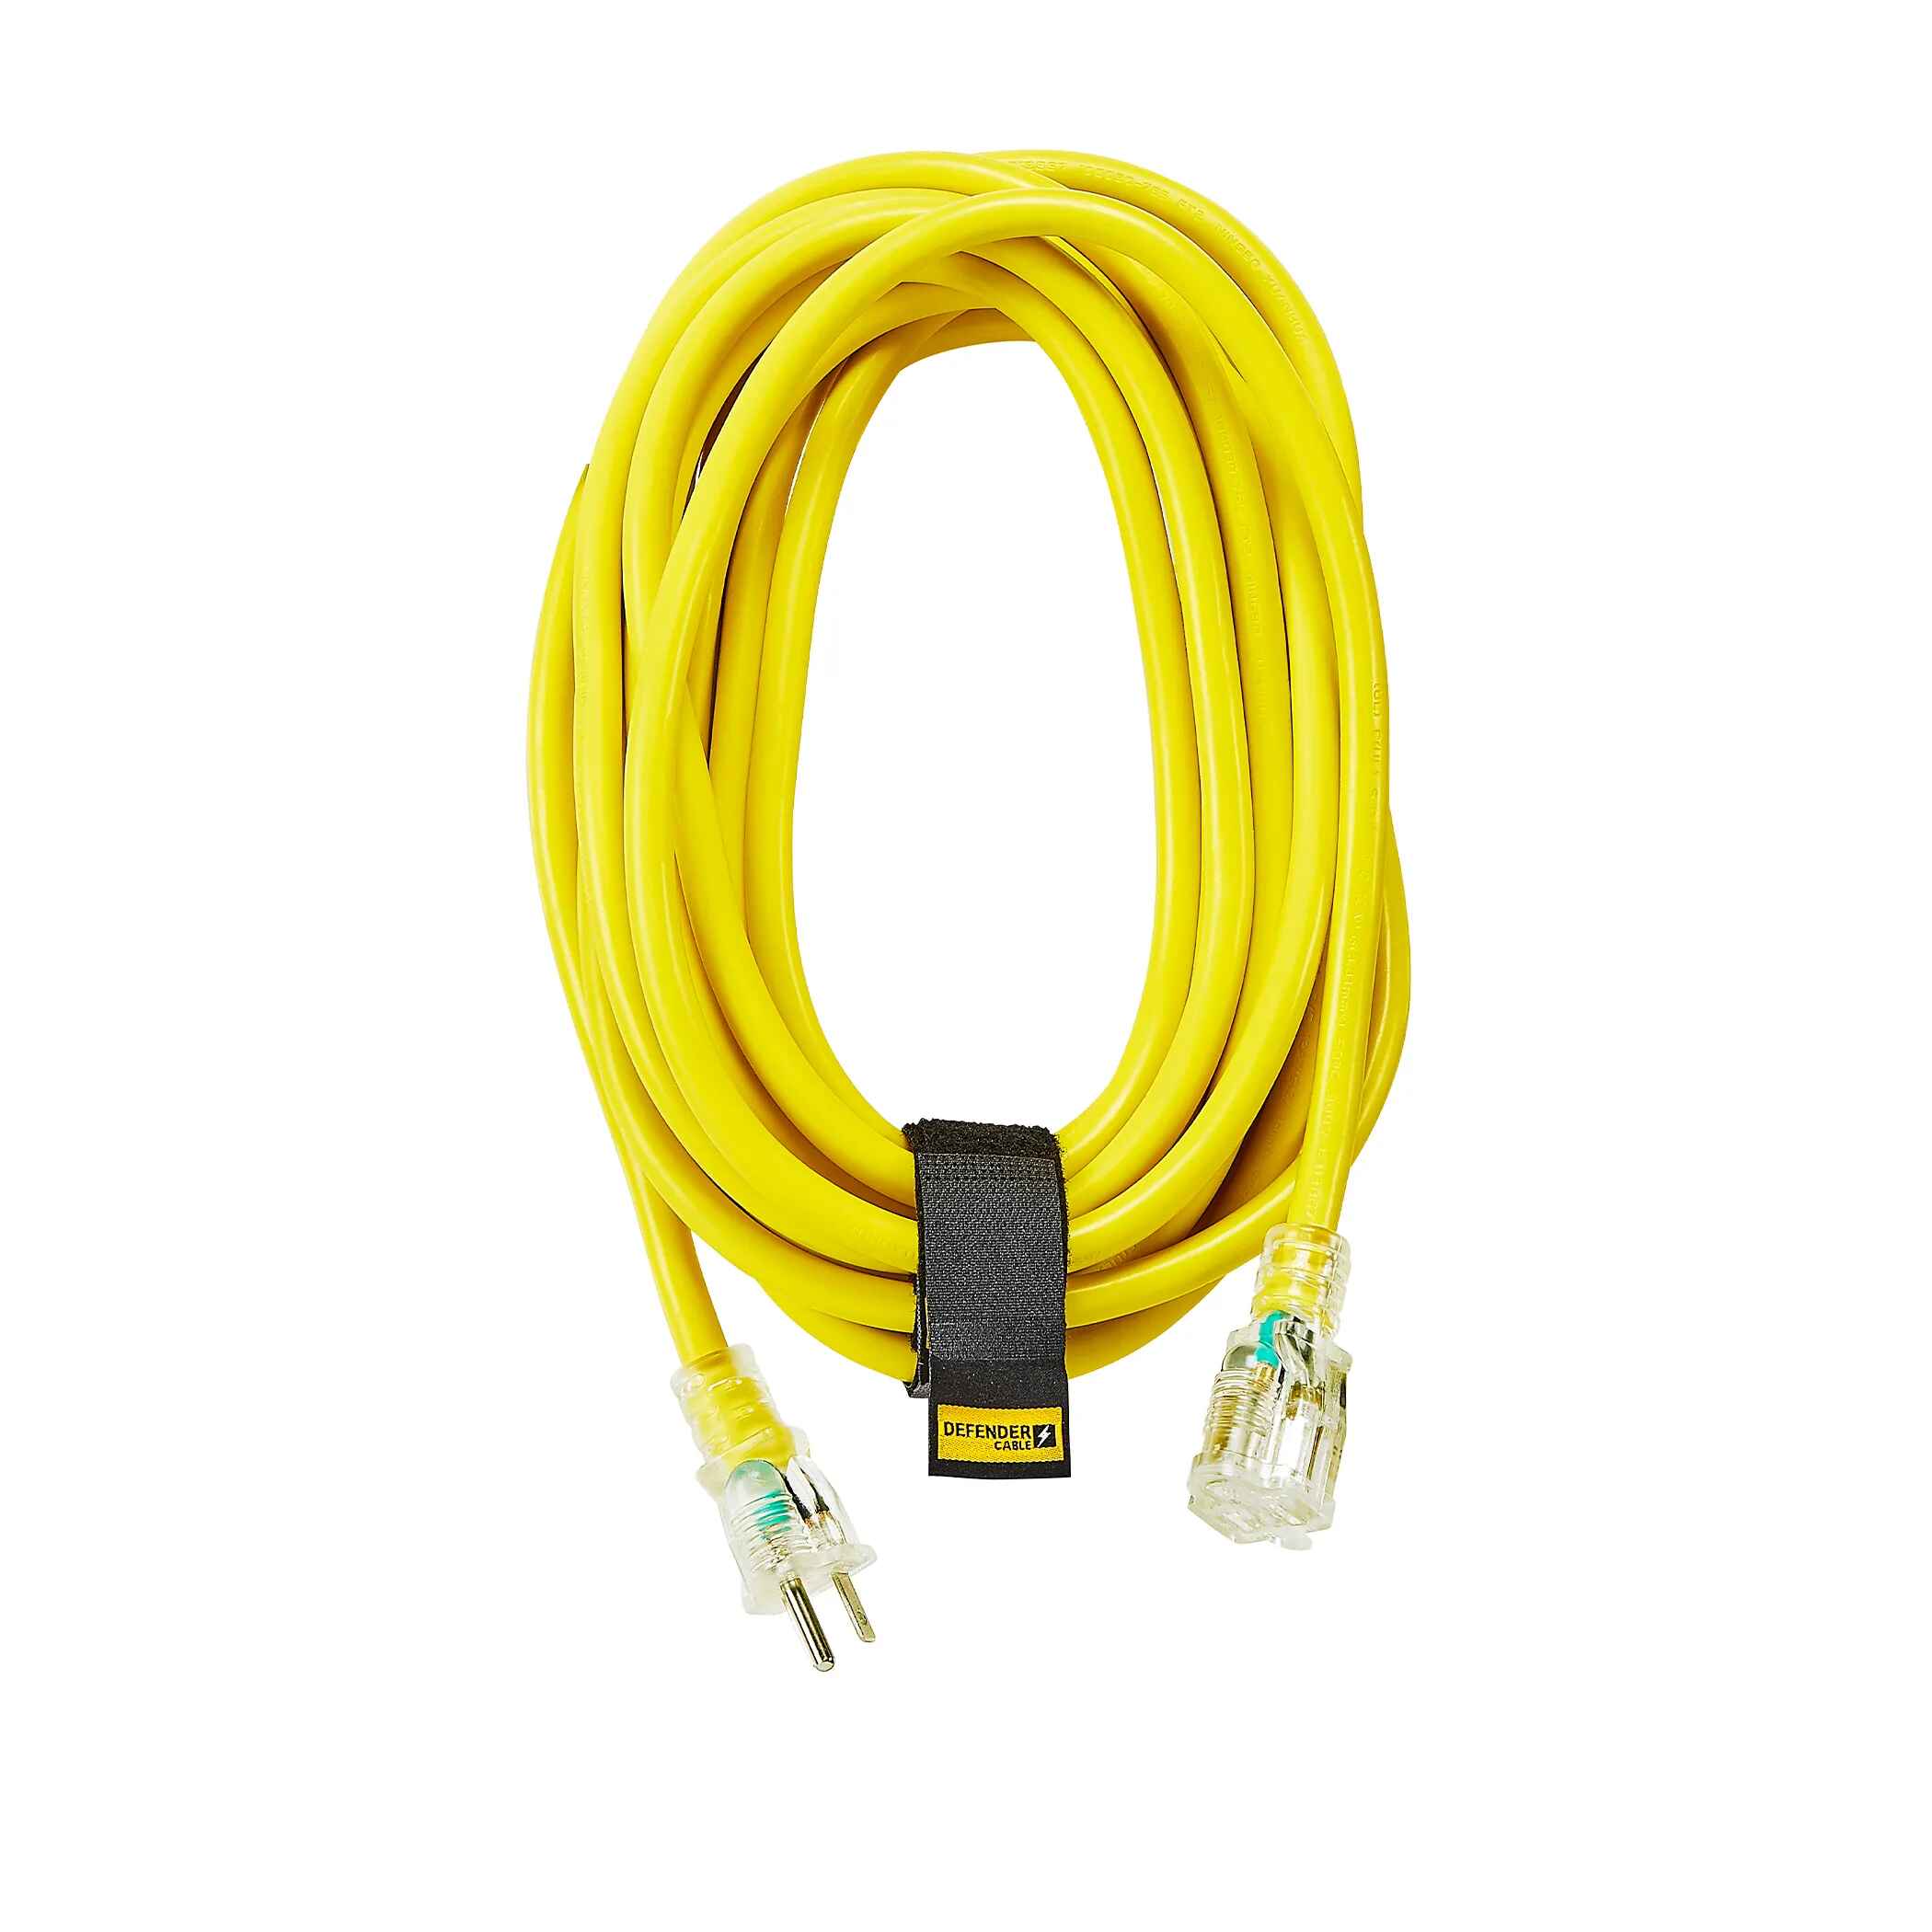 Retractable Extension Cord for mounting on mobile TV Cart? : r